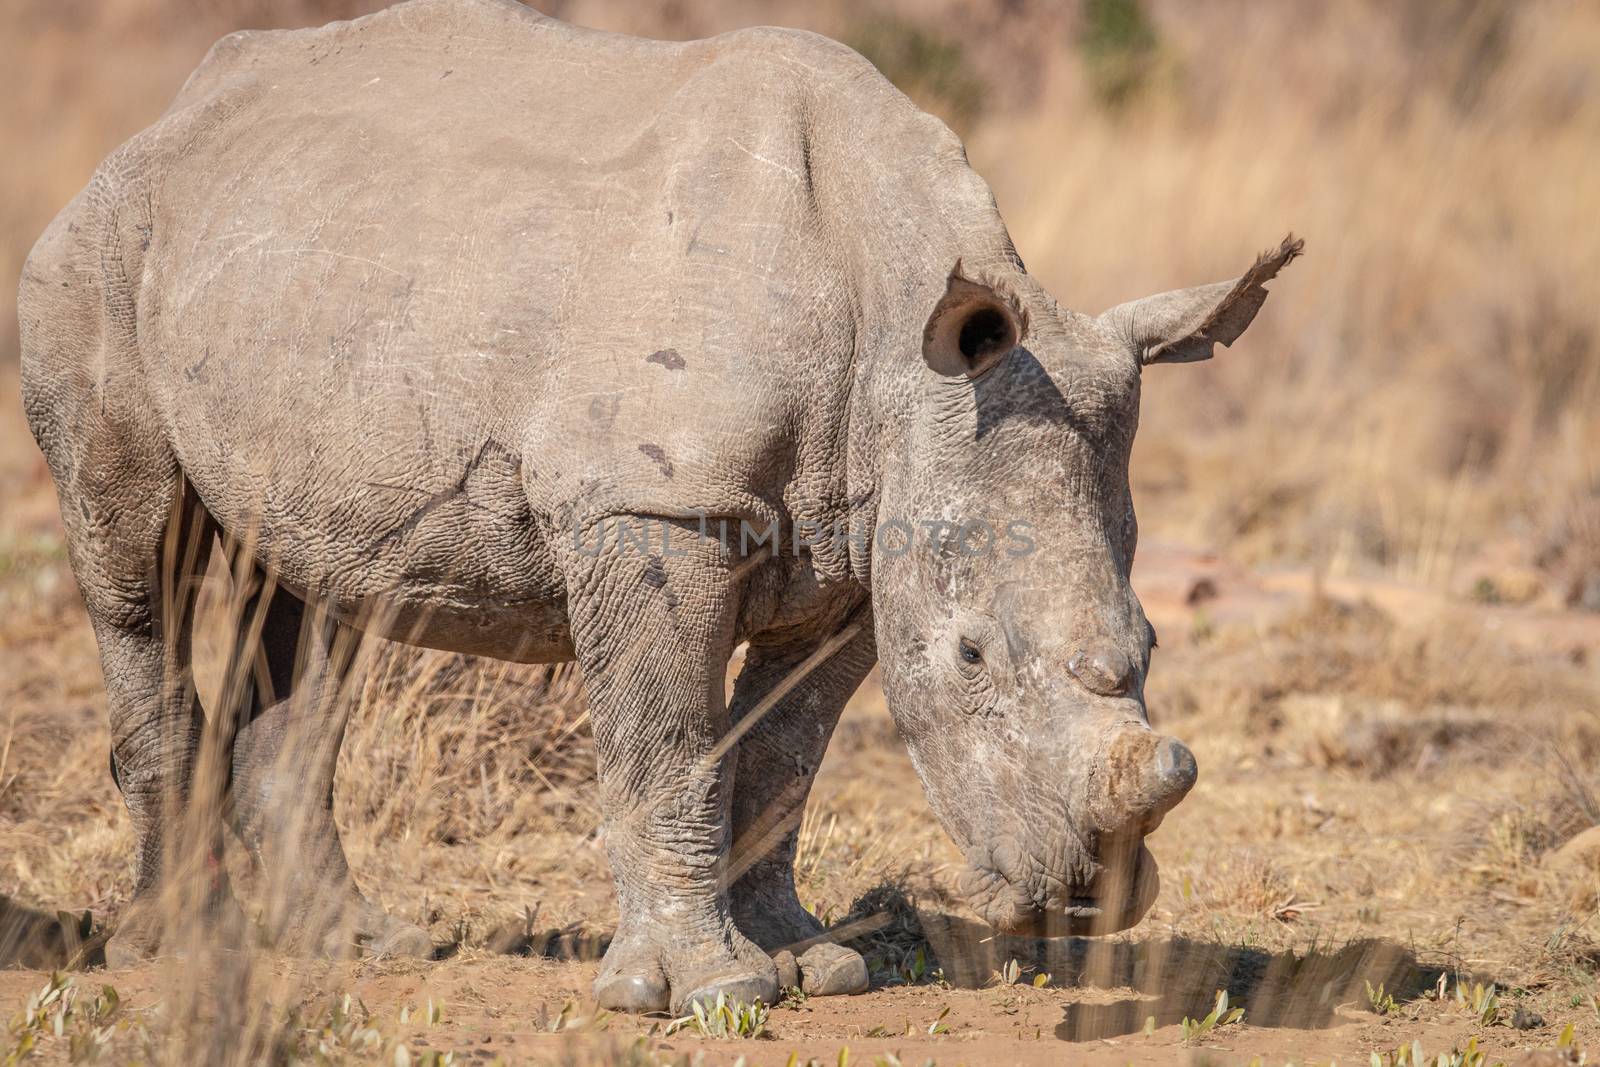 White rhino standing in the grass. by Simoneemanphotography